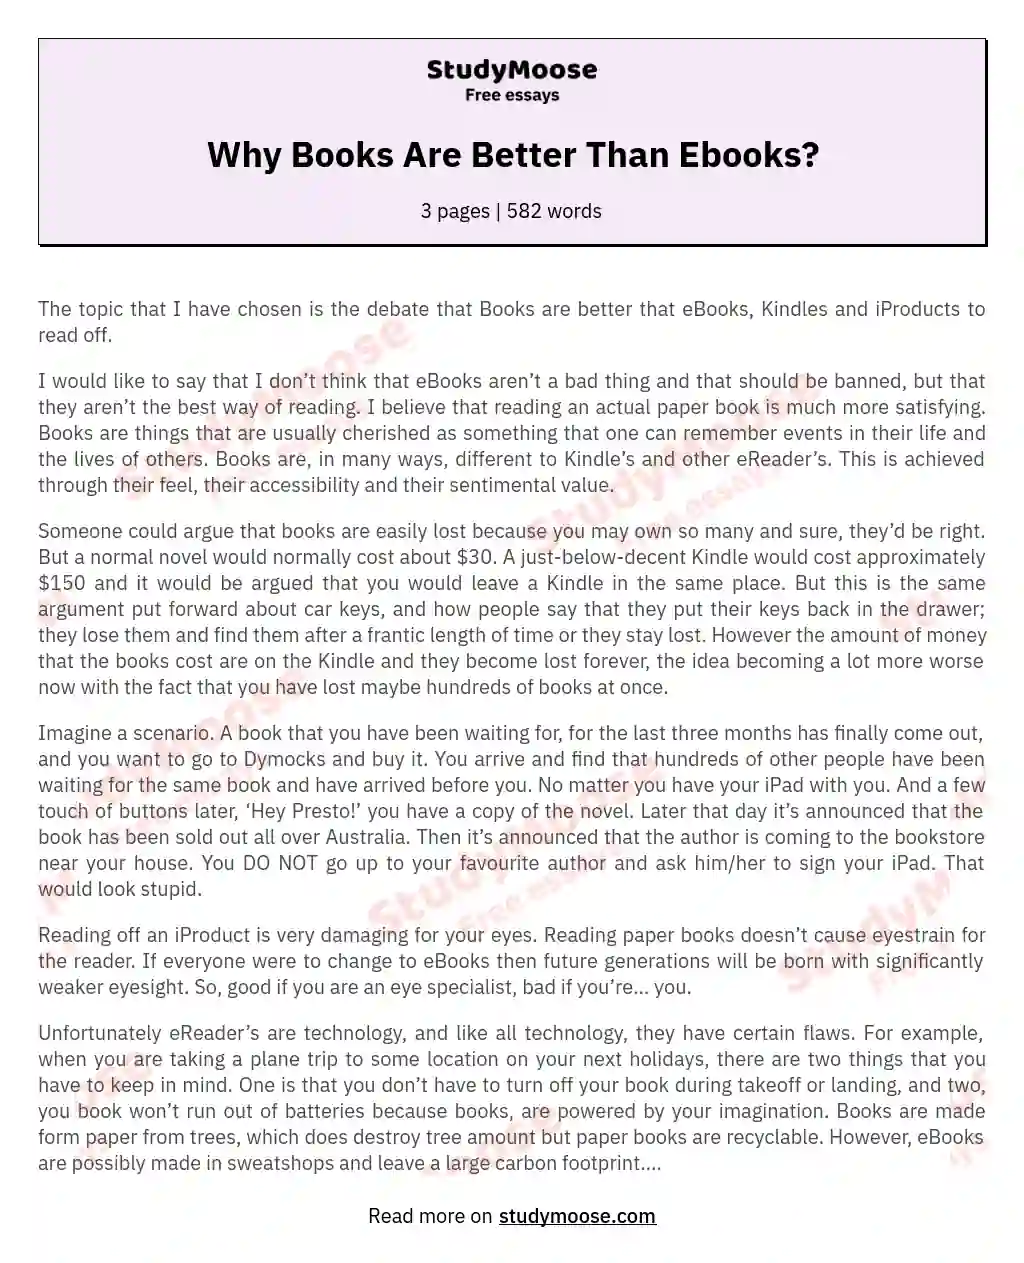 essay on paper books are better than ebooks